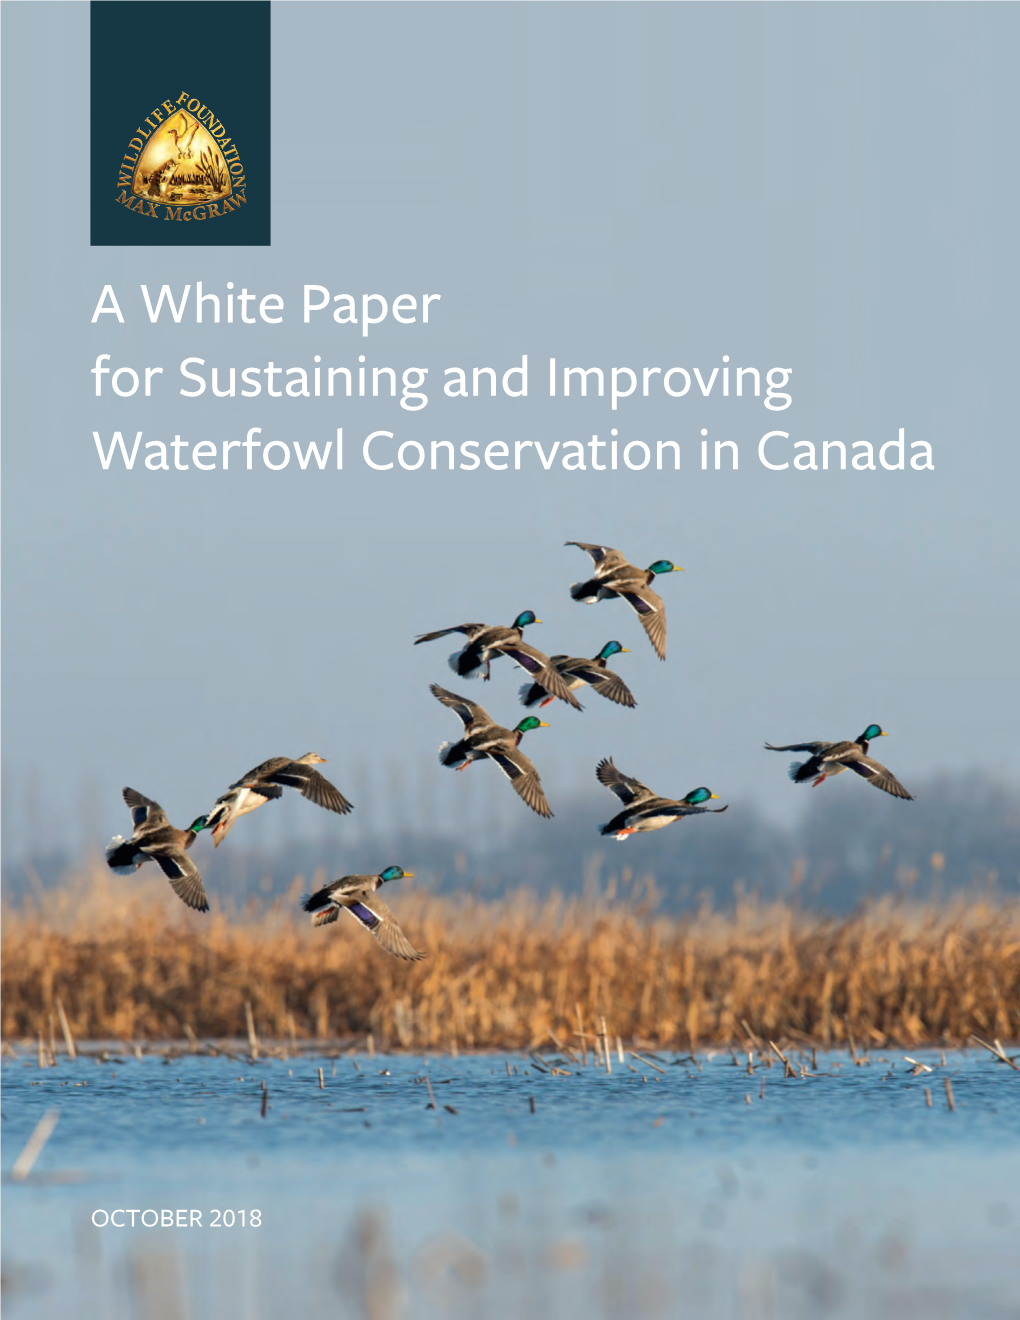 A White Paper for Sustaining and Improving Waterfowl Conservation in Canada